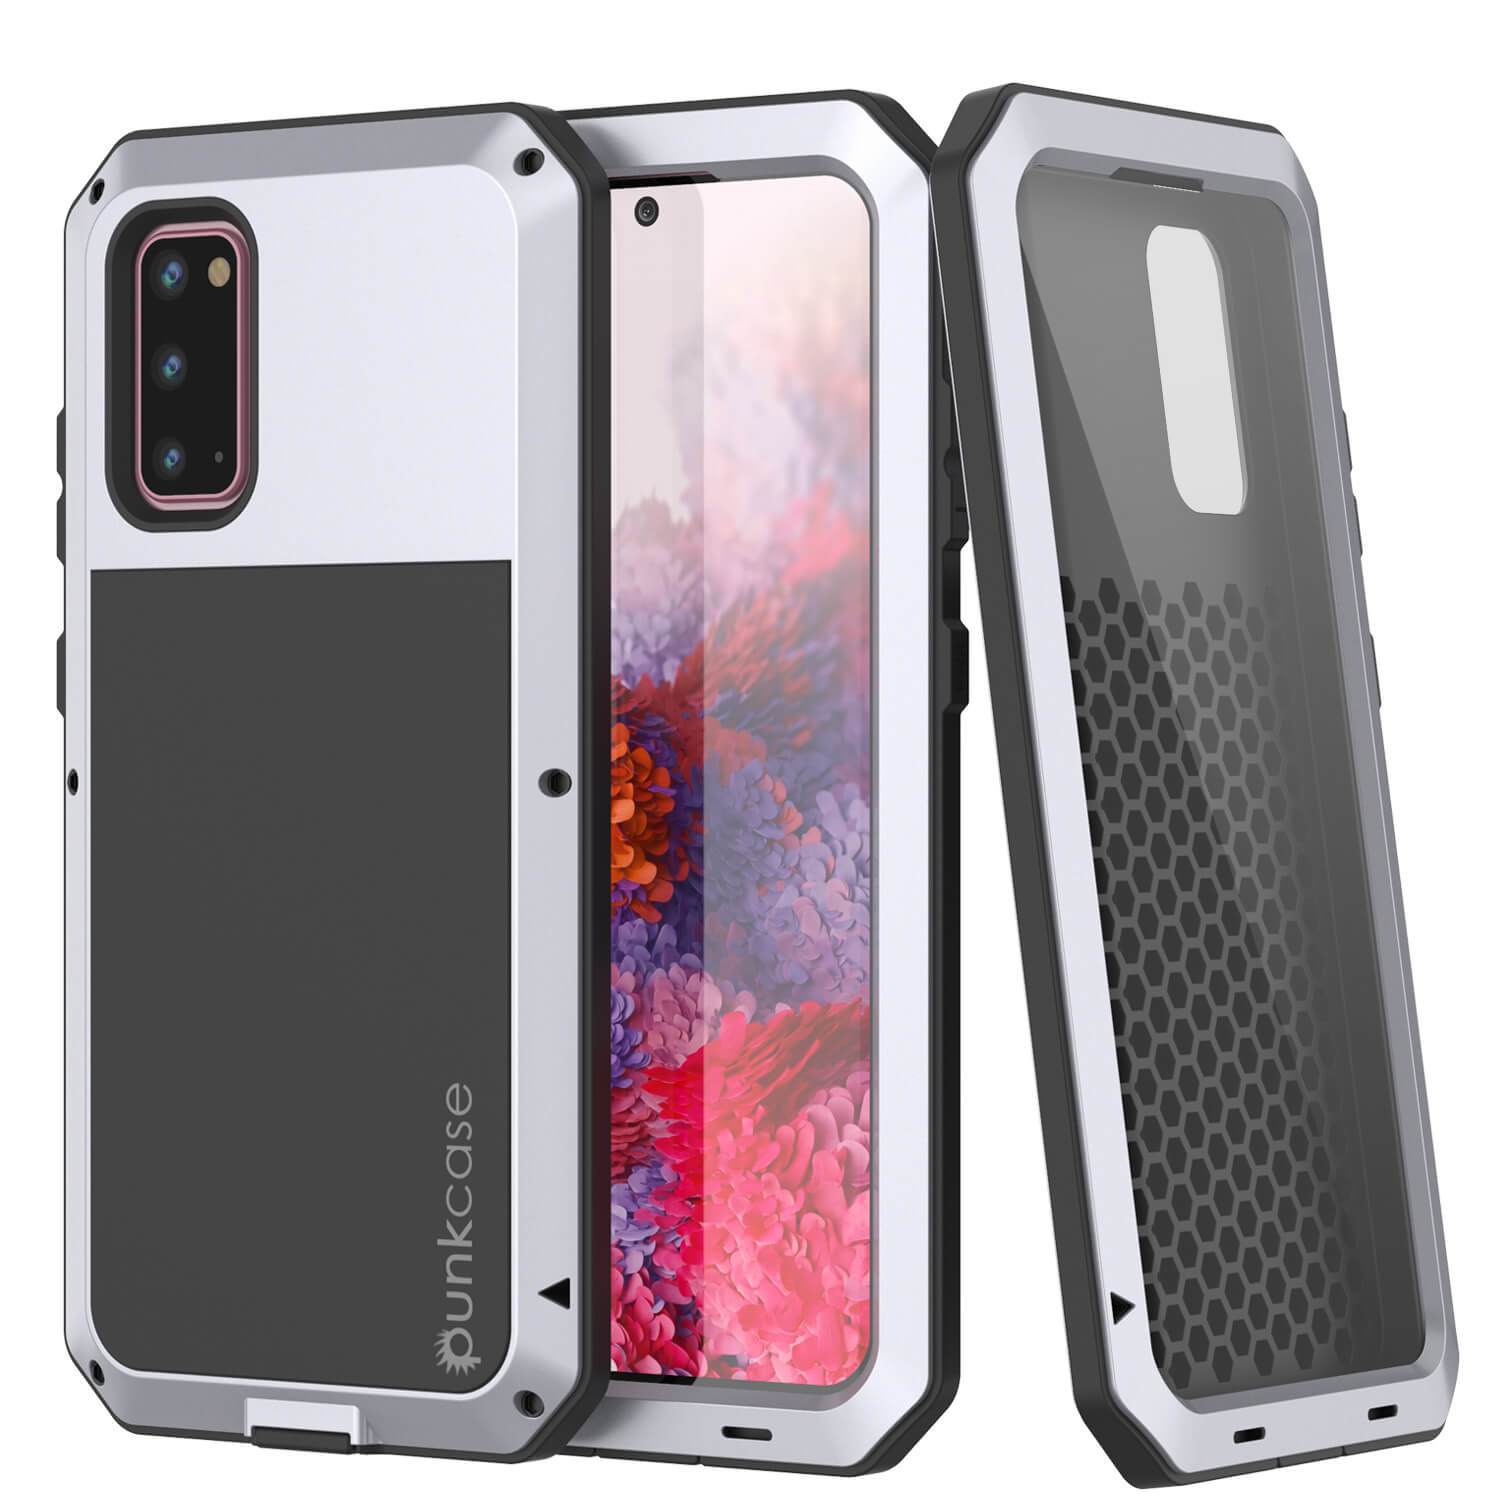 Galaxy s20 Metal Case, Heavy Duty Military Grade Rugged Armor Cover [White]